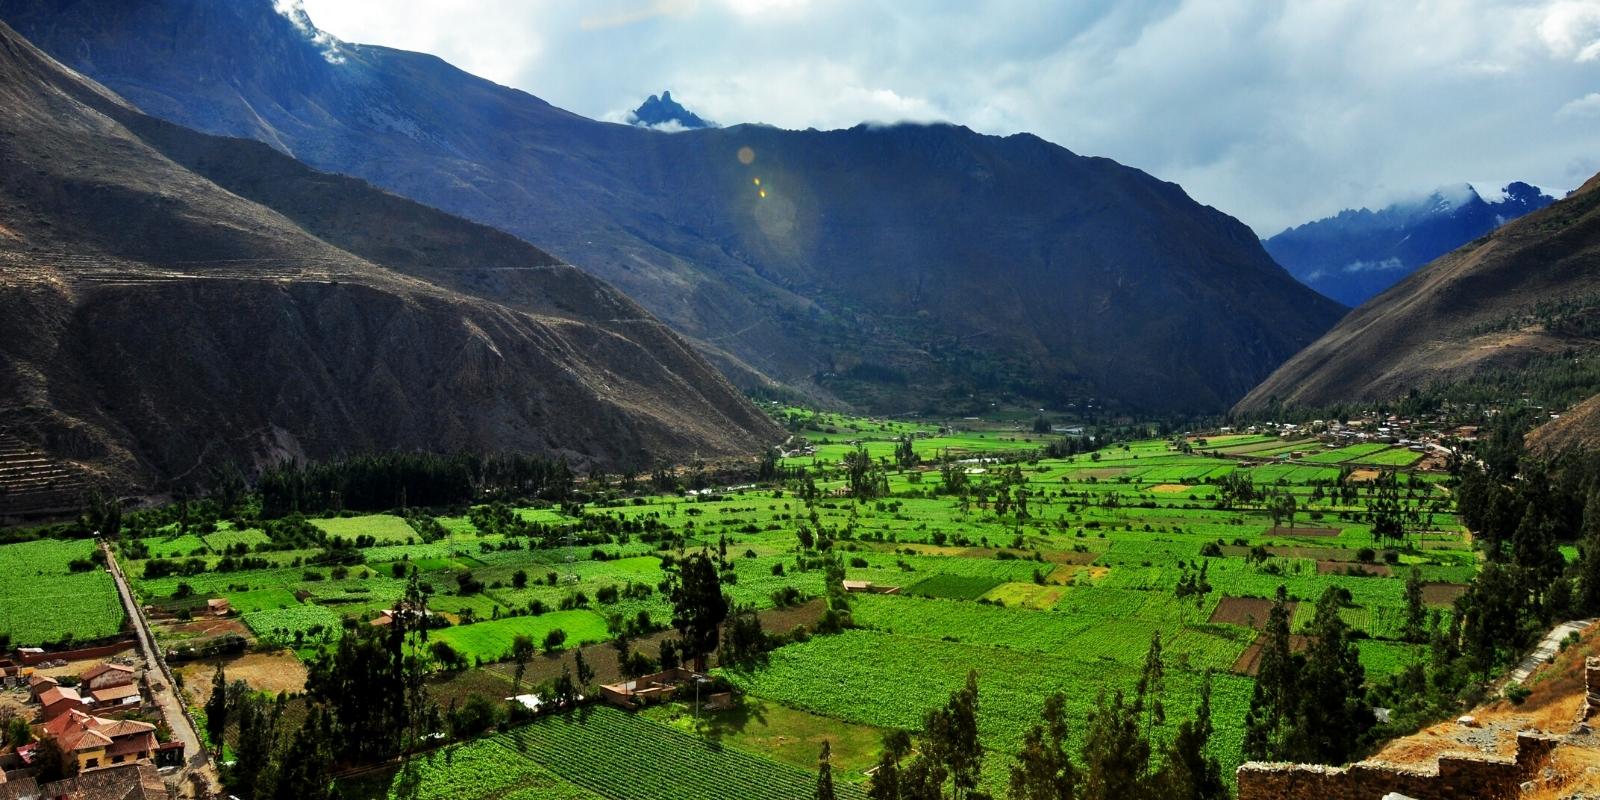 What to see in the archaeological site of Ollantaytambo?